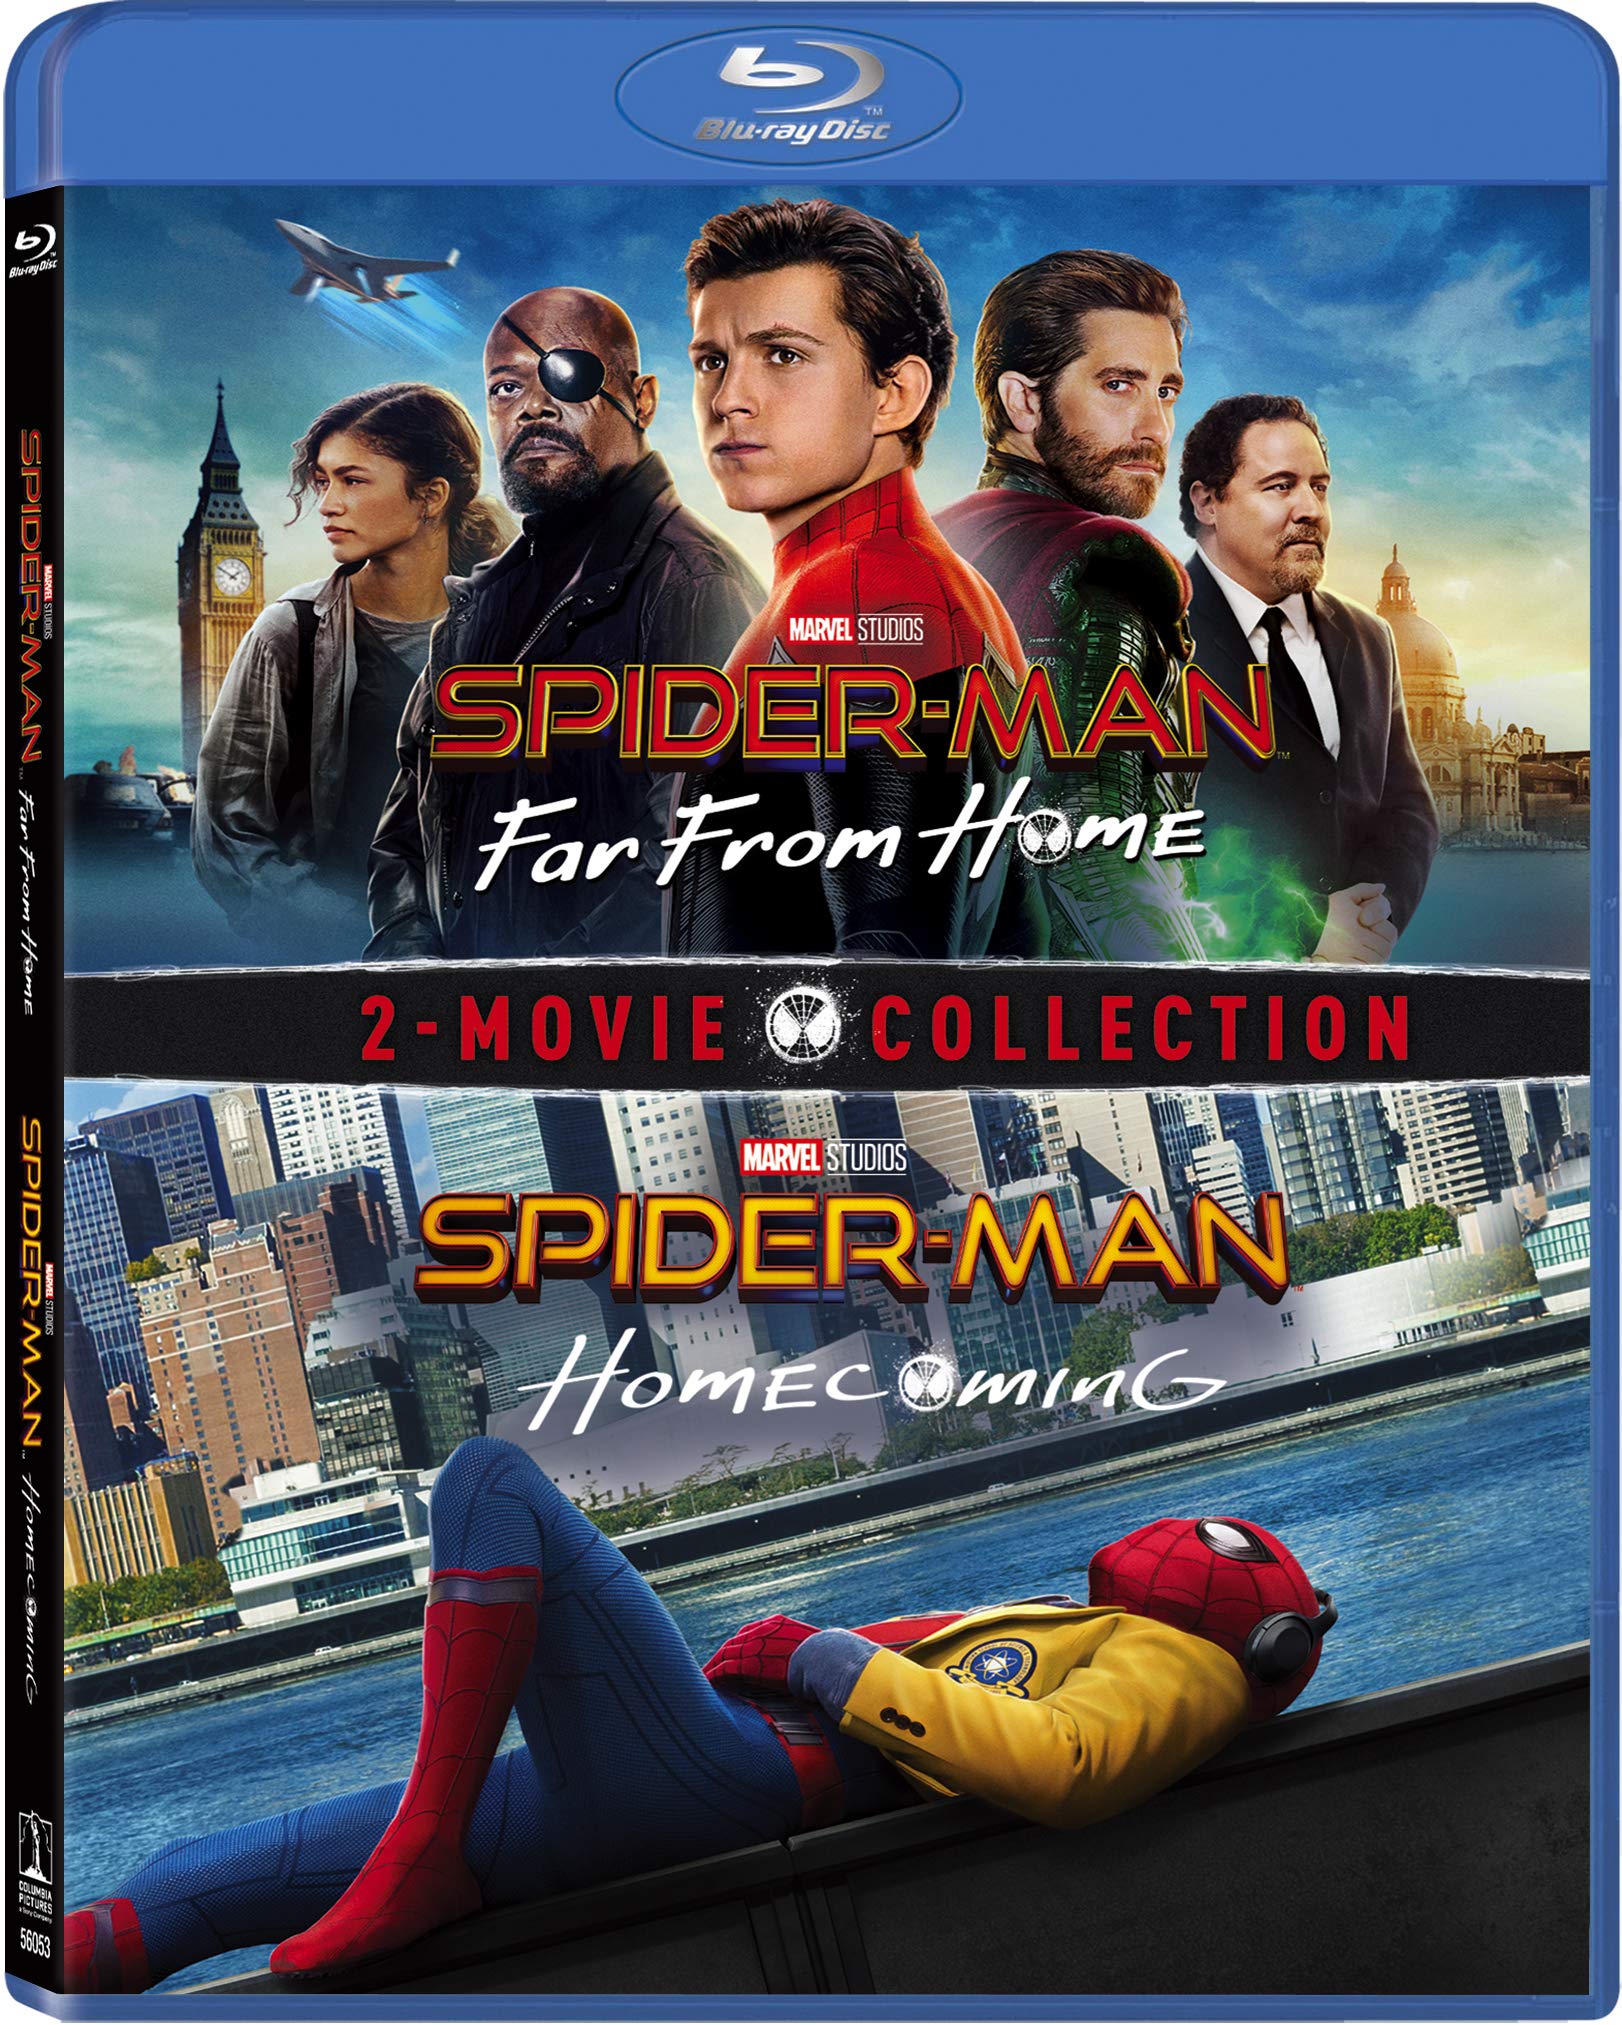 Spider-Man 2-Movie Collection: Far from Home & Homecoming (Blu-ray) $8.02 + Free Shipping w/ Prime or on $35+